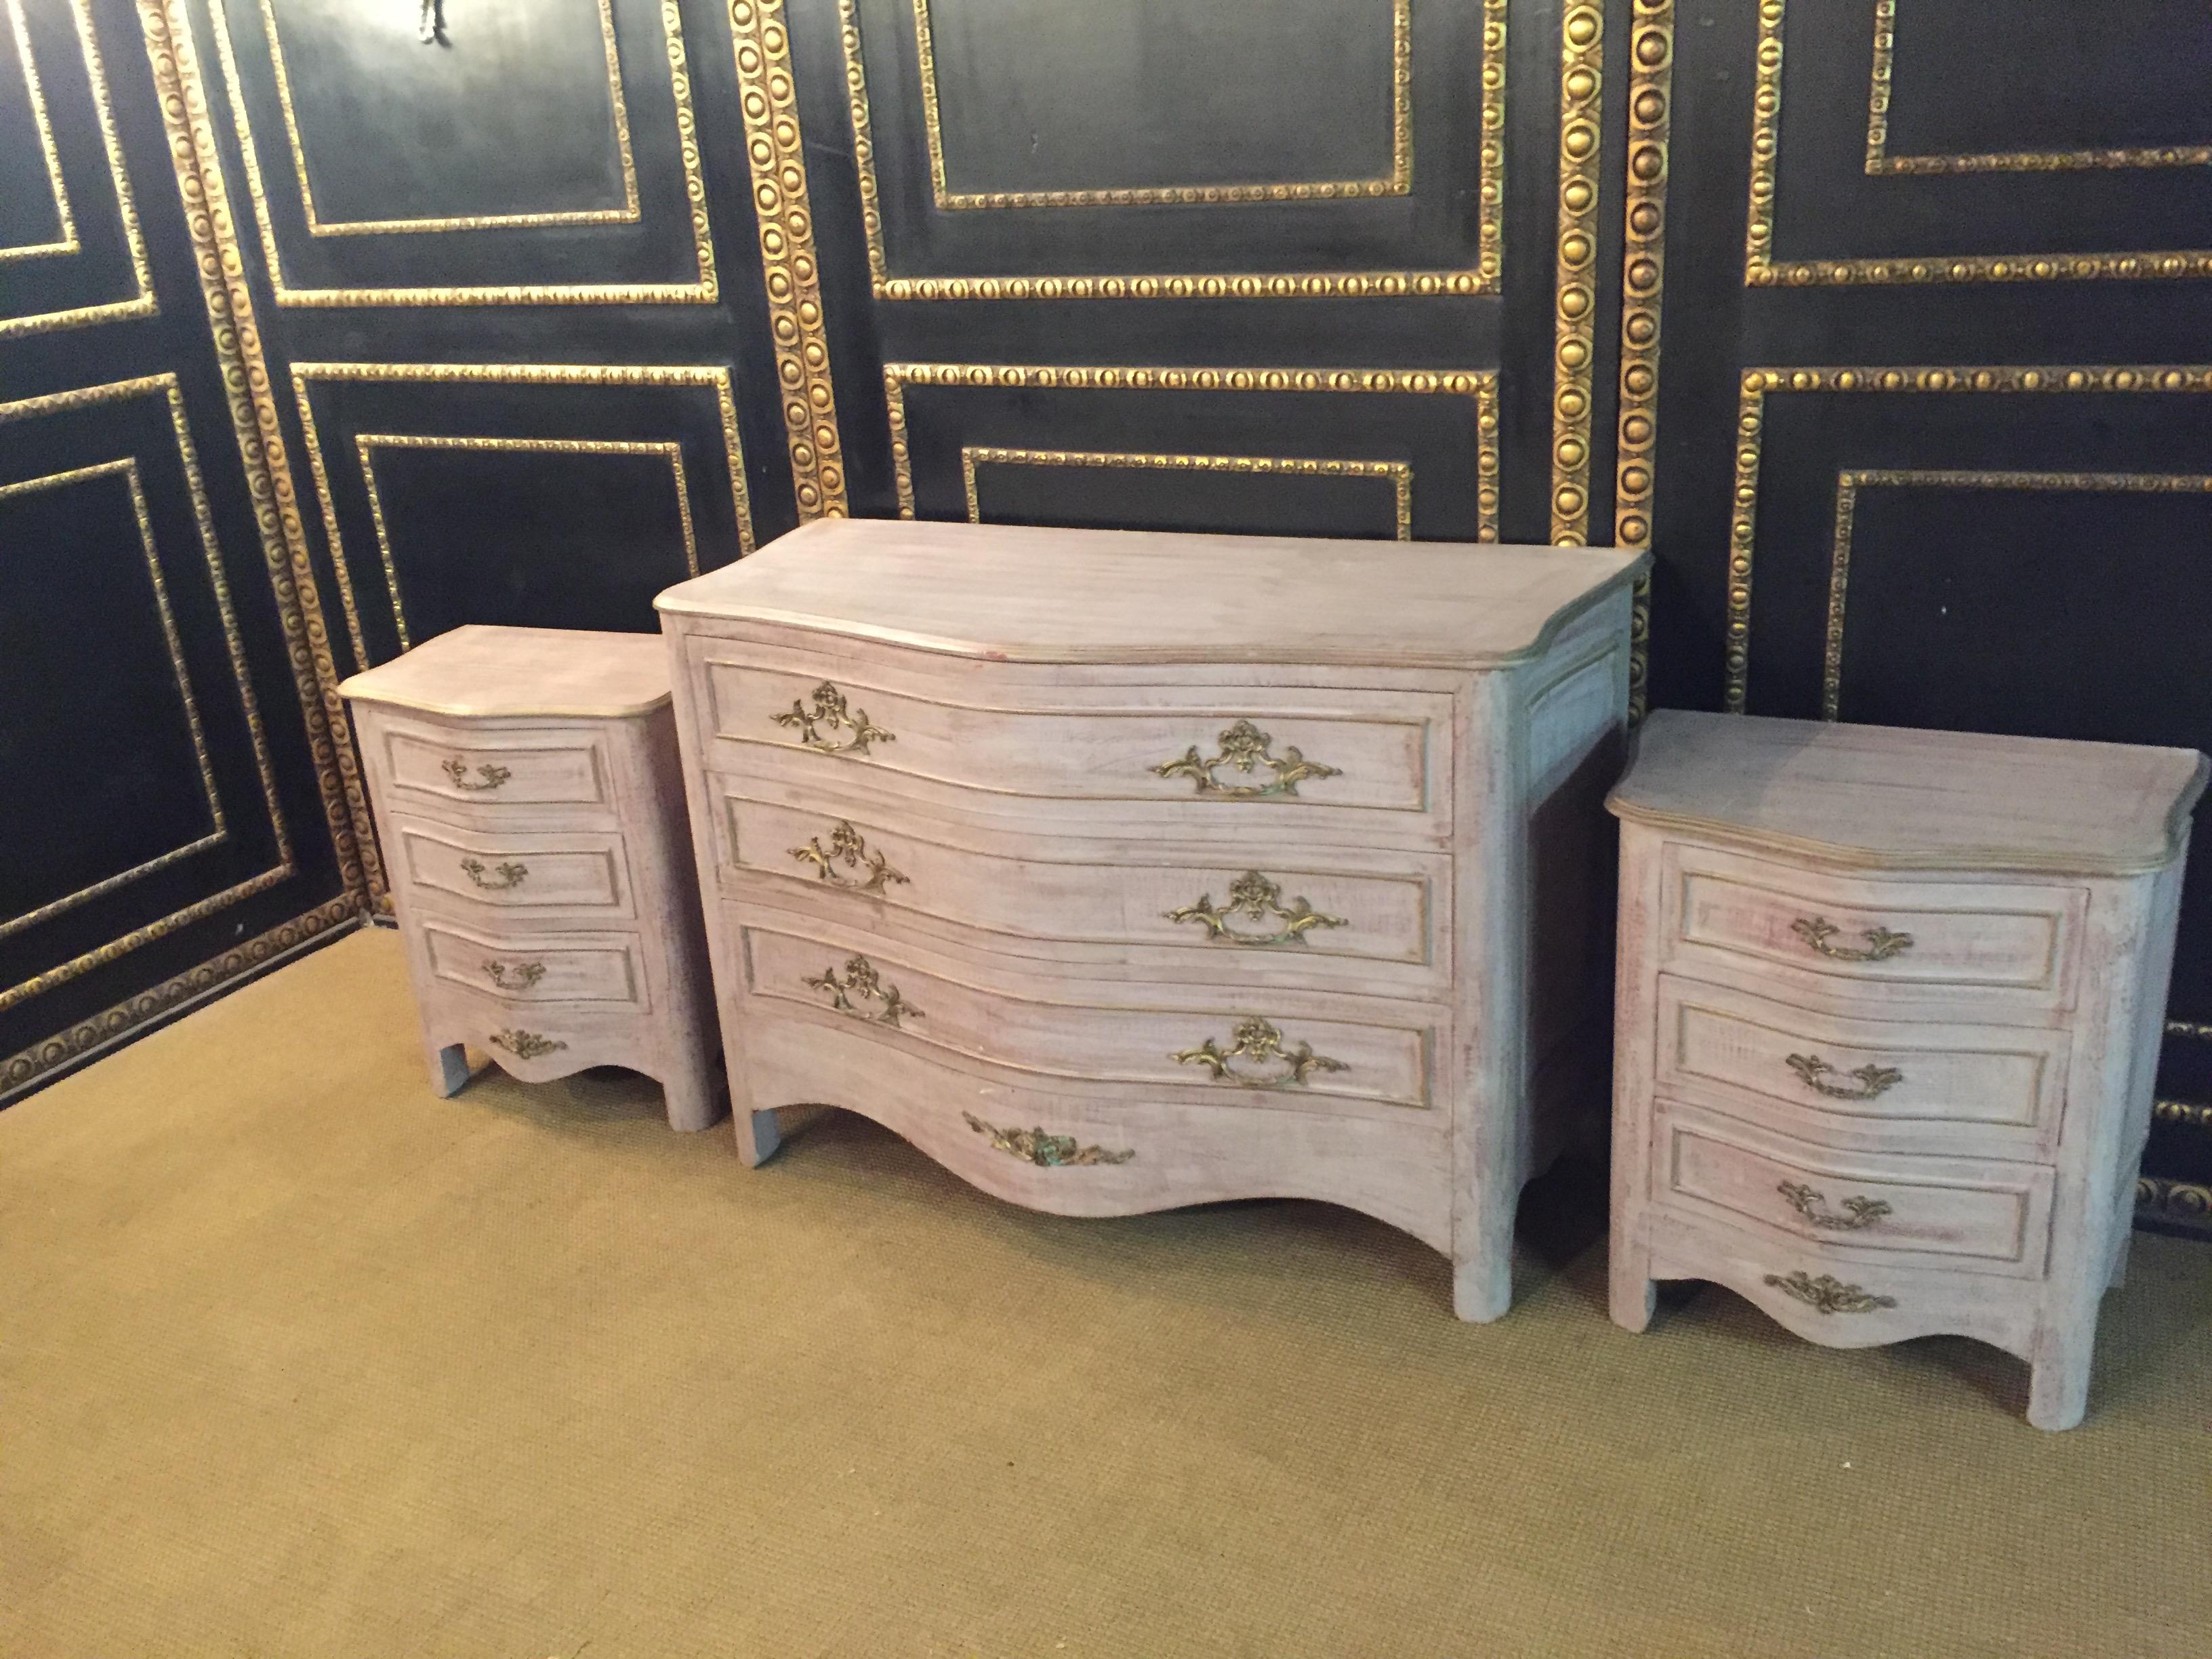 Big chest of drawers and 2 small ones.
Solid beechwood in a very appealing gray, antique version. Scalloped frame on sloping legs. In the properly curved front there are three drawers. The side walls contain profiled fillings. Slightly protruding,